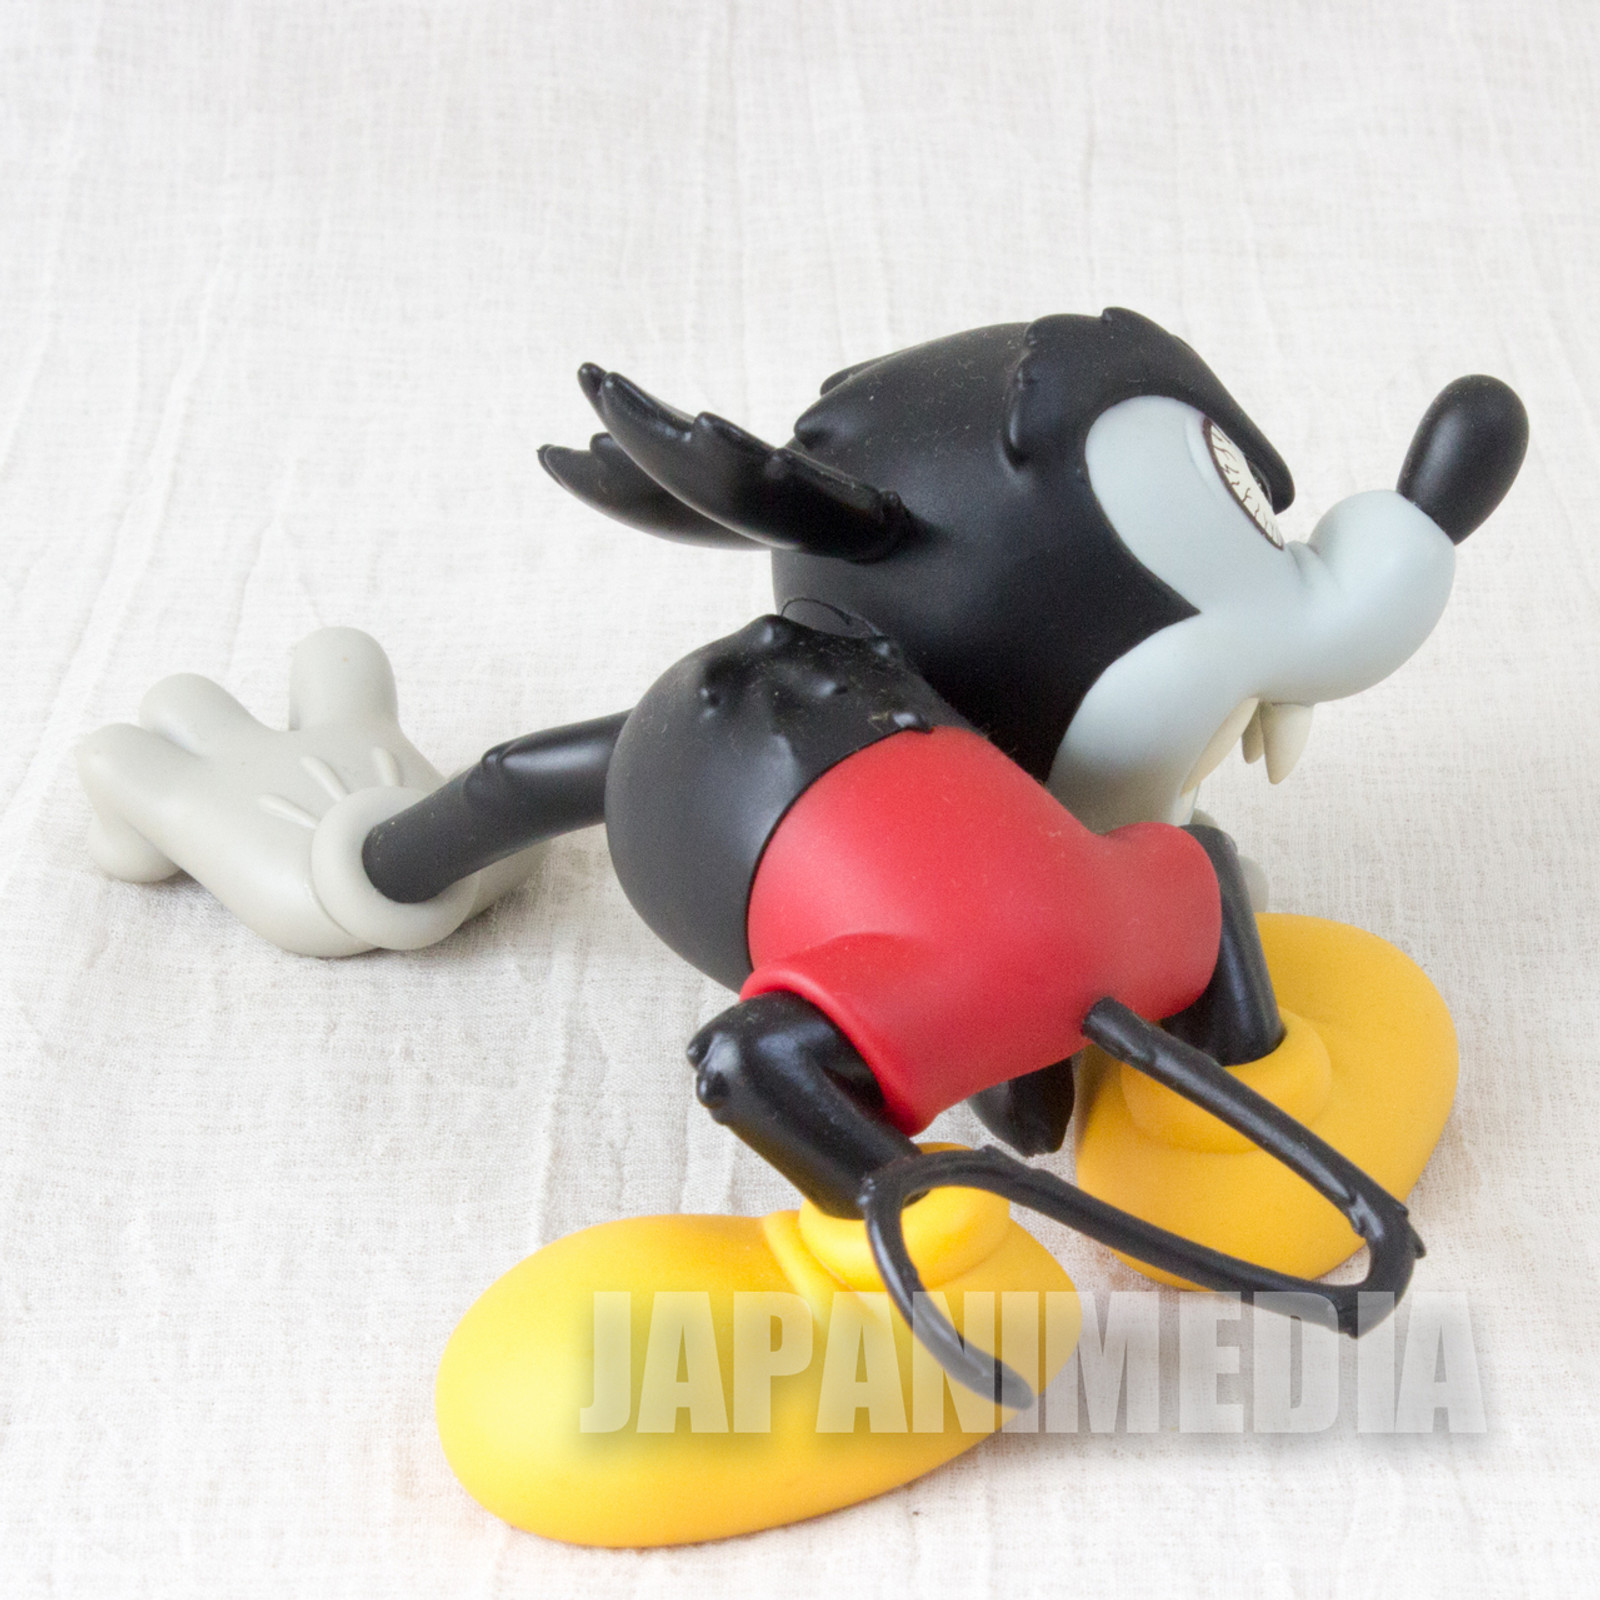 runaway Brain MEDICOM Toy UDF Mickey Mouse Figure From Japan 12b for sale online 